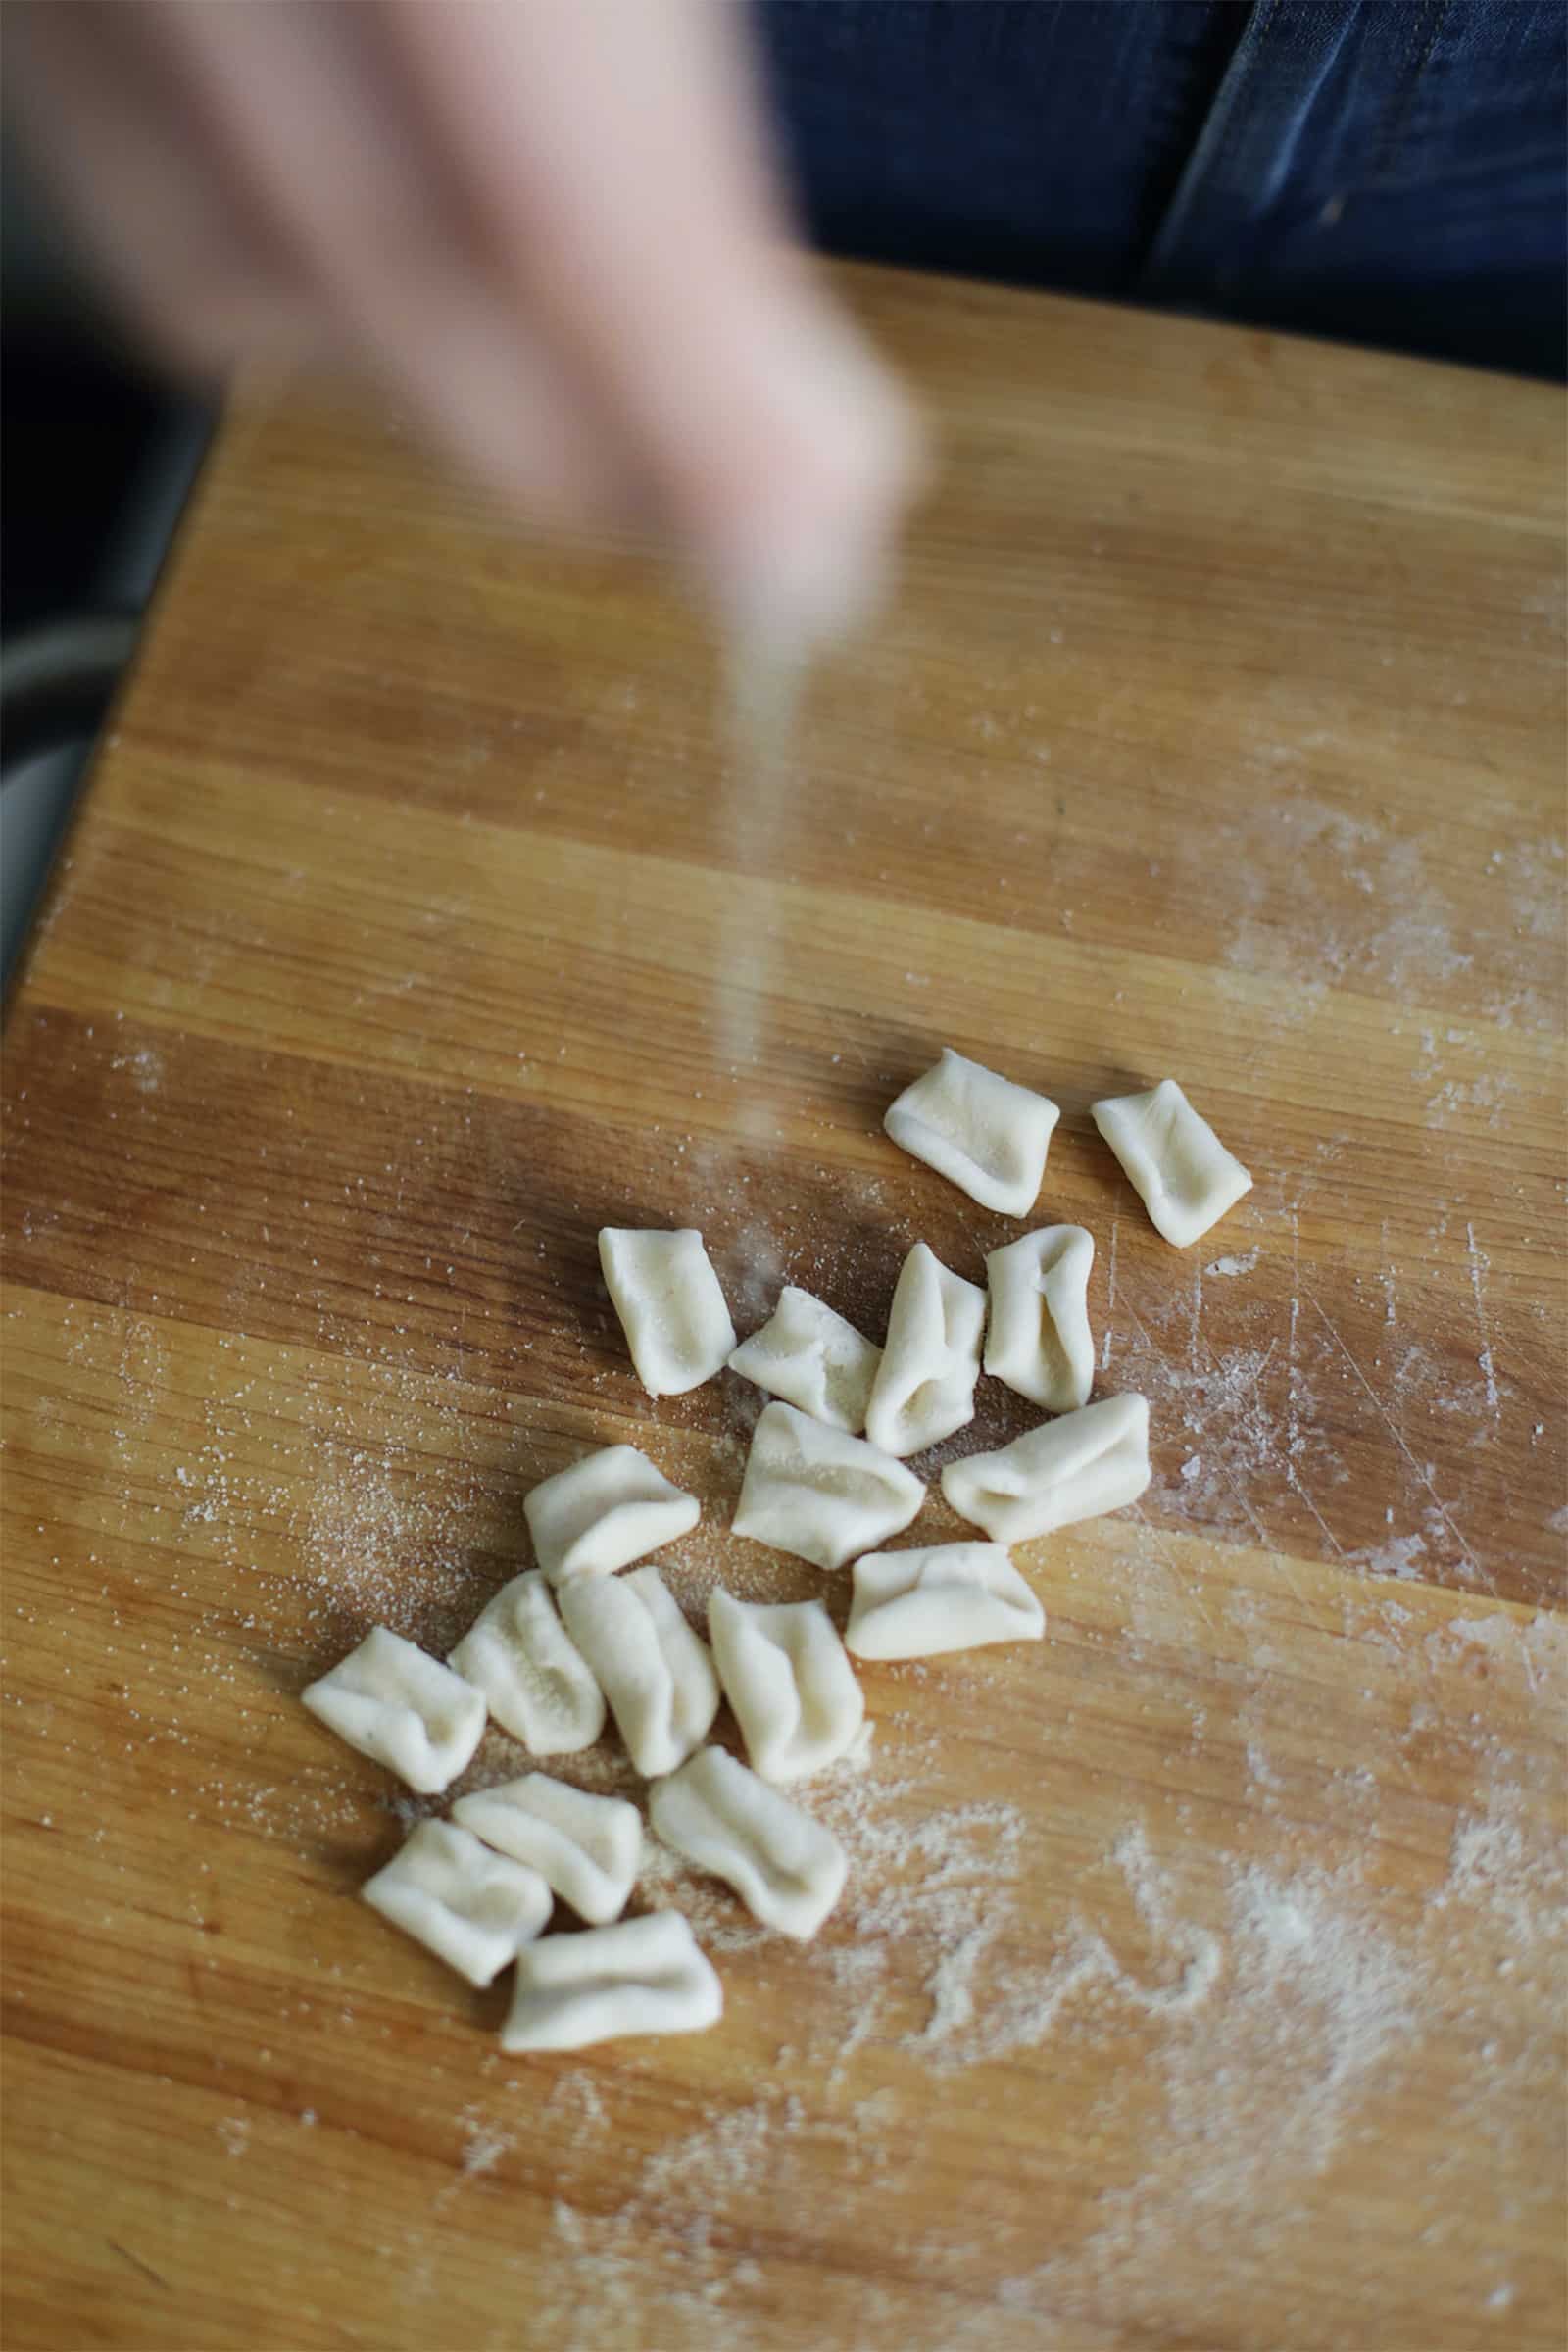 How To Make Cavatelli Pasta From Scratch